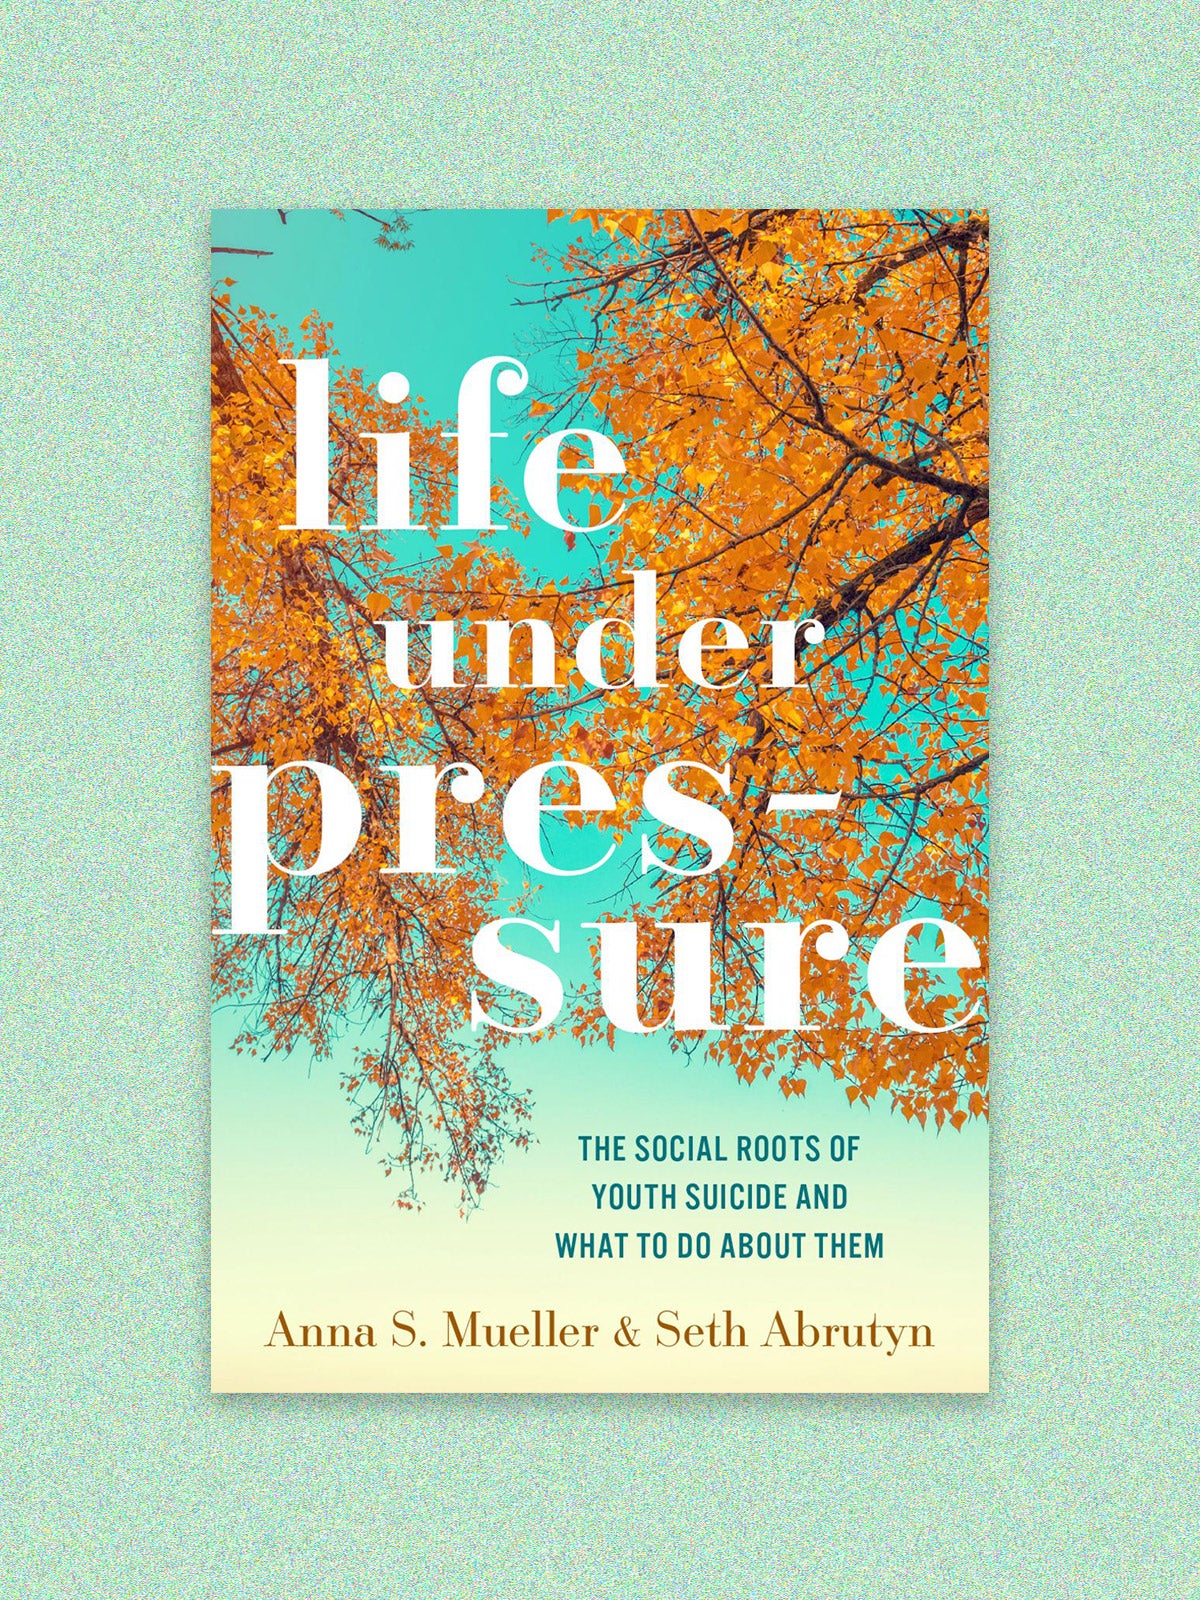 Book cover for “Life under pressure: The social roots of youth suicide and what to do about them” by Anna S. Mueller and Seth Arbrutyn; White text on an image of golden tree leaves, looking up. The cover is on a light green speckled background.